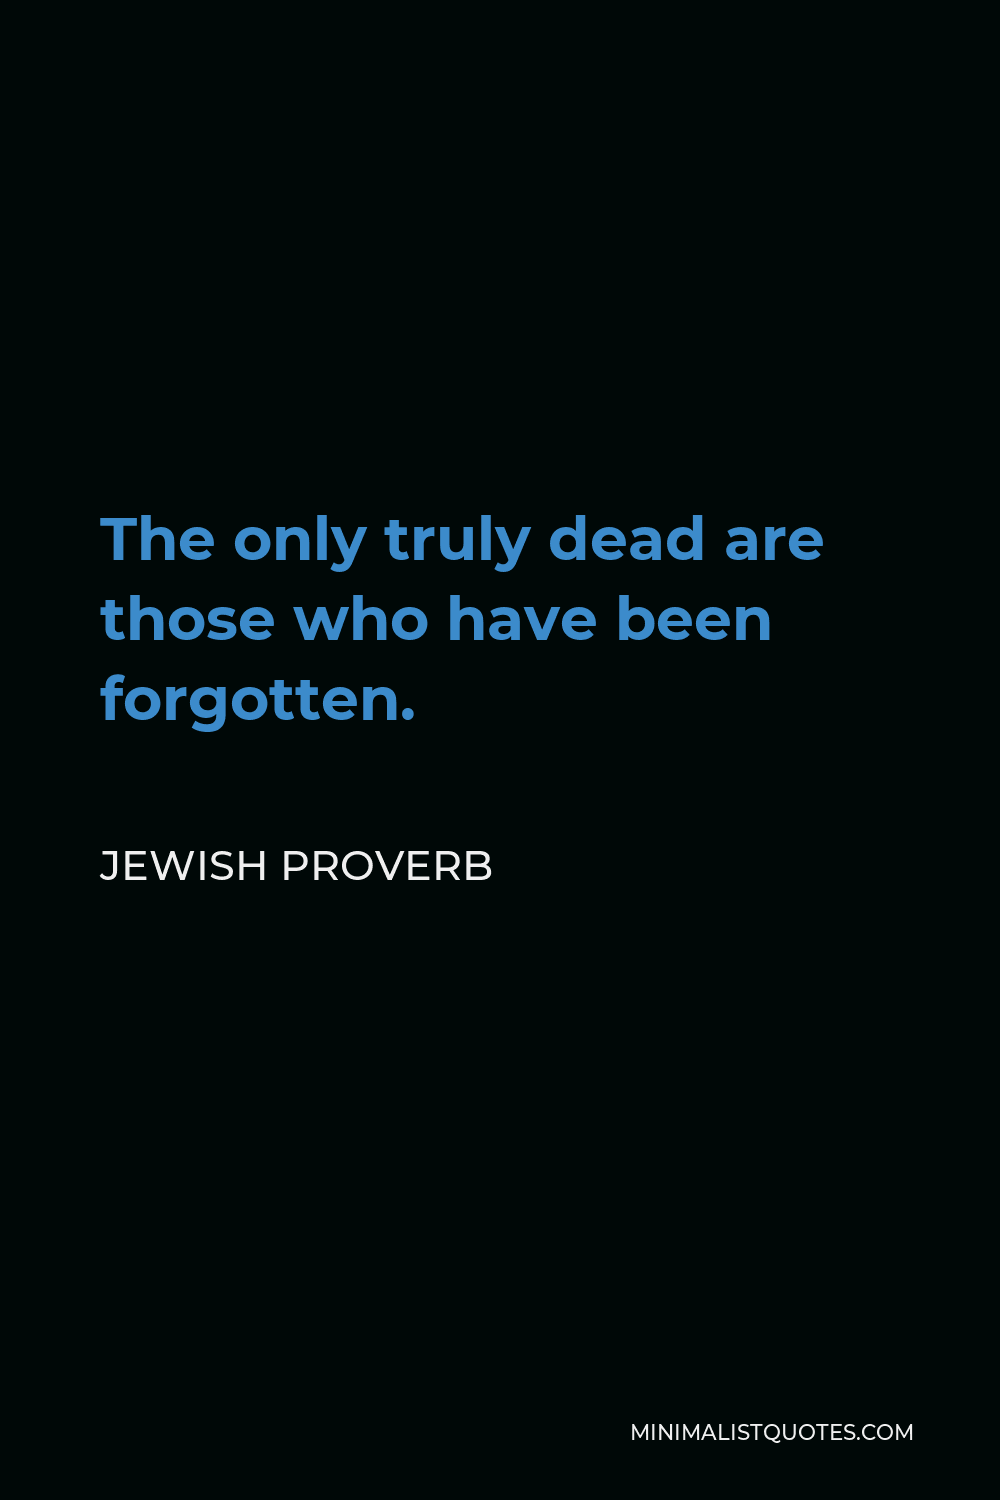 Jewish Proverb Quote - The only truly dead are those who have been forgotten.